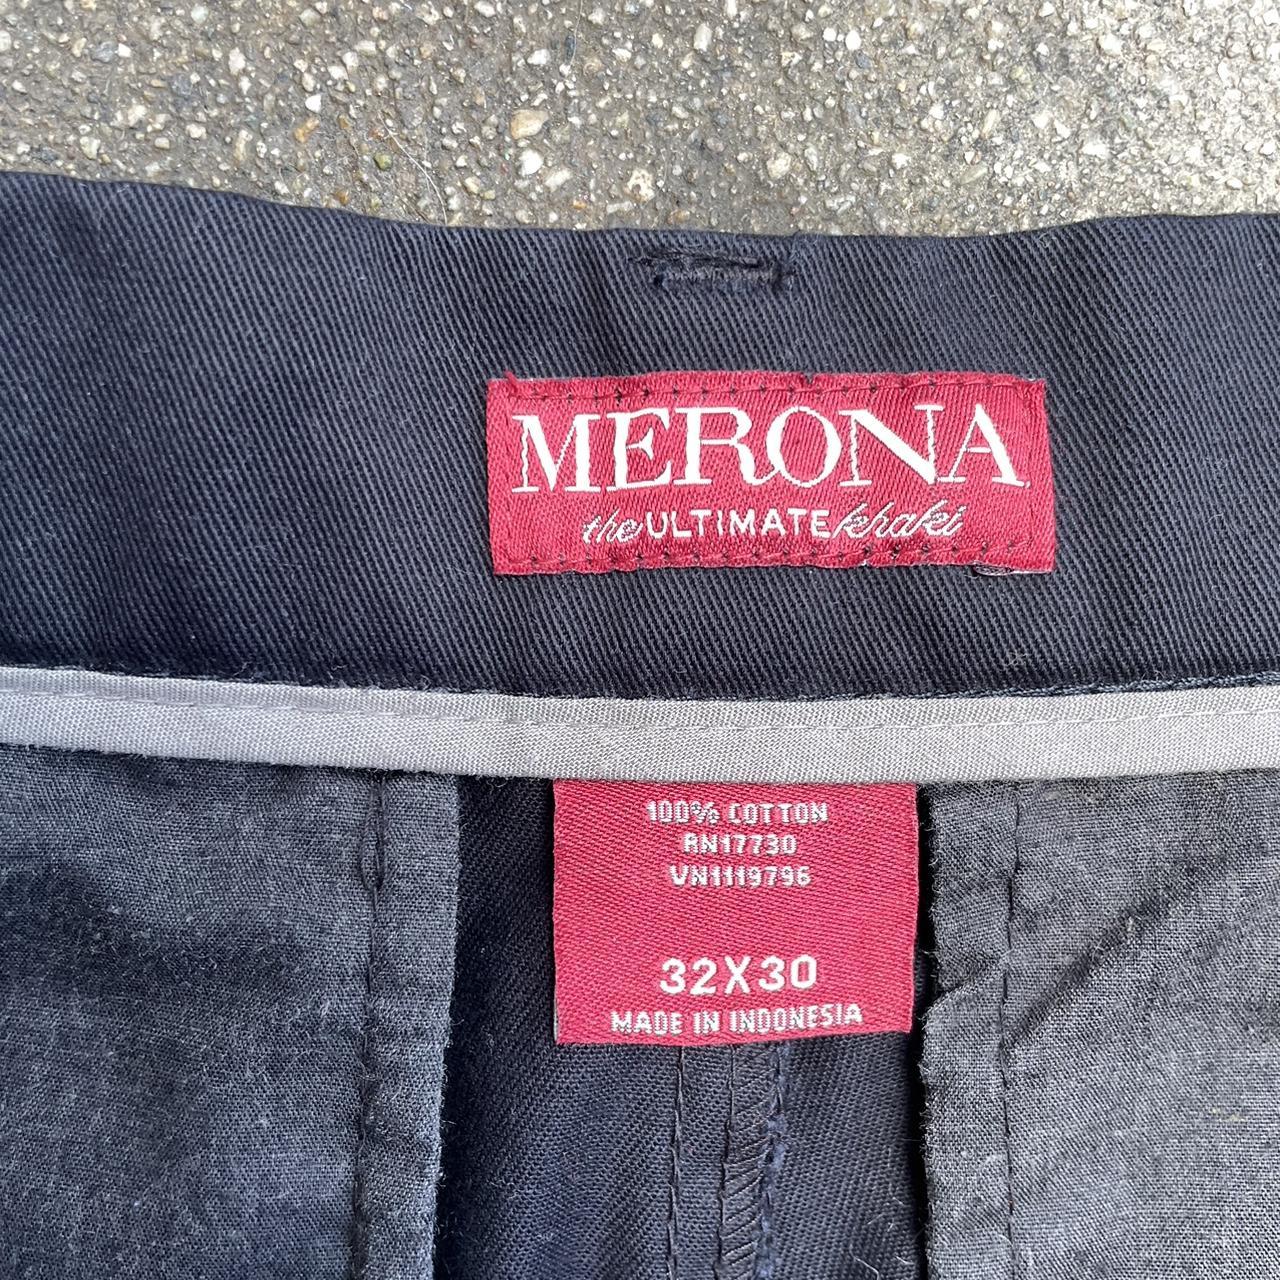 Merona Pants 32x30 All offers accepted - Depop